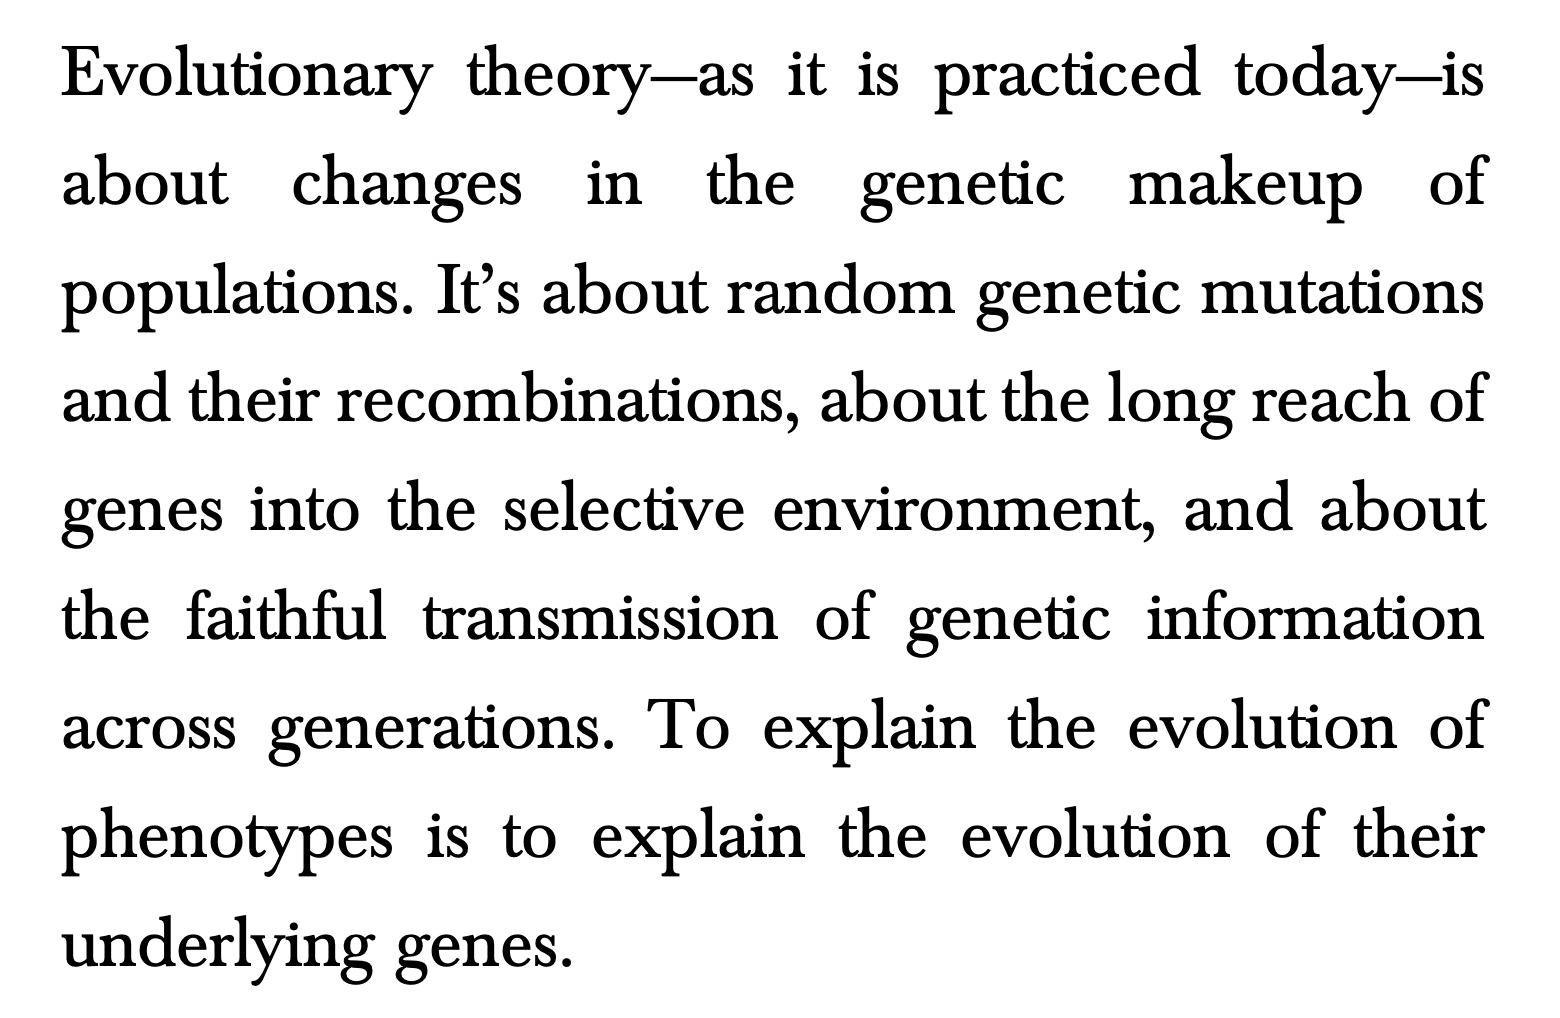 The Forgotten Piece of Evolutionary Theory (and why we need it back)